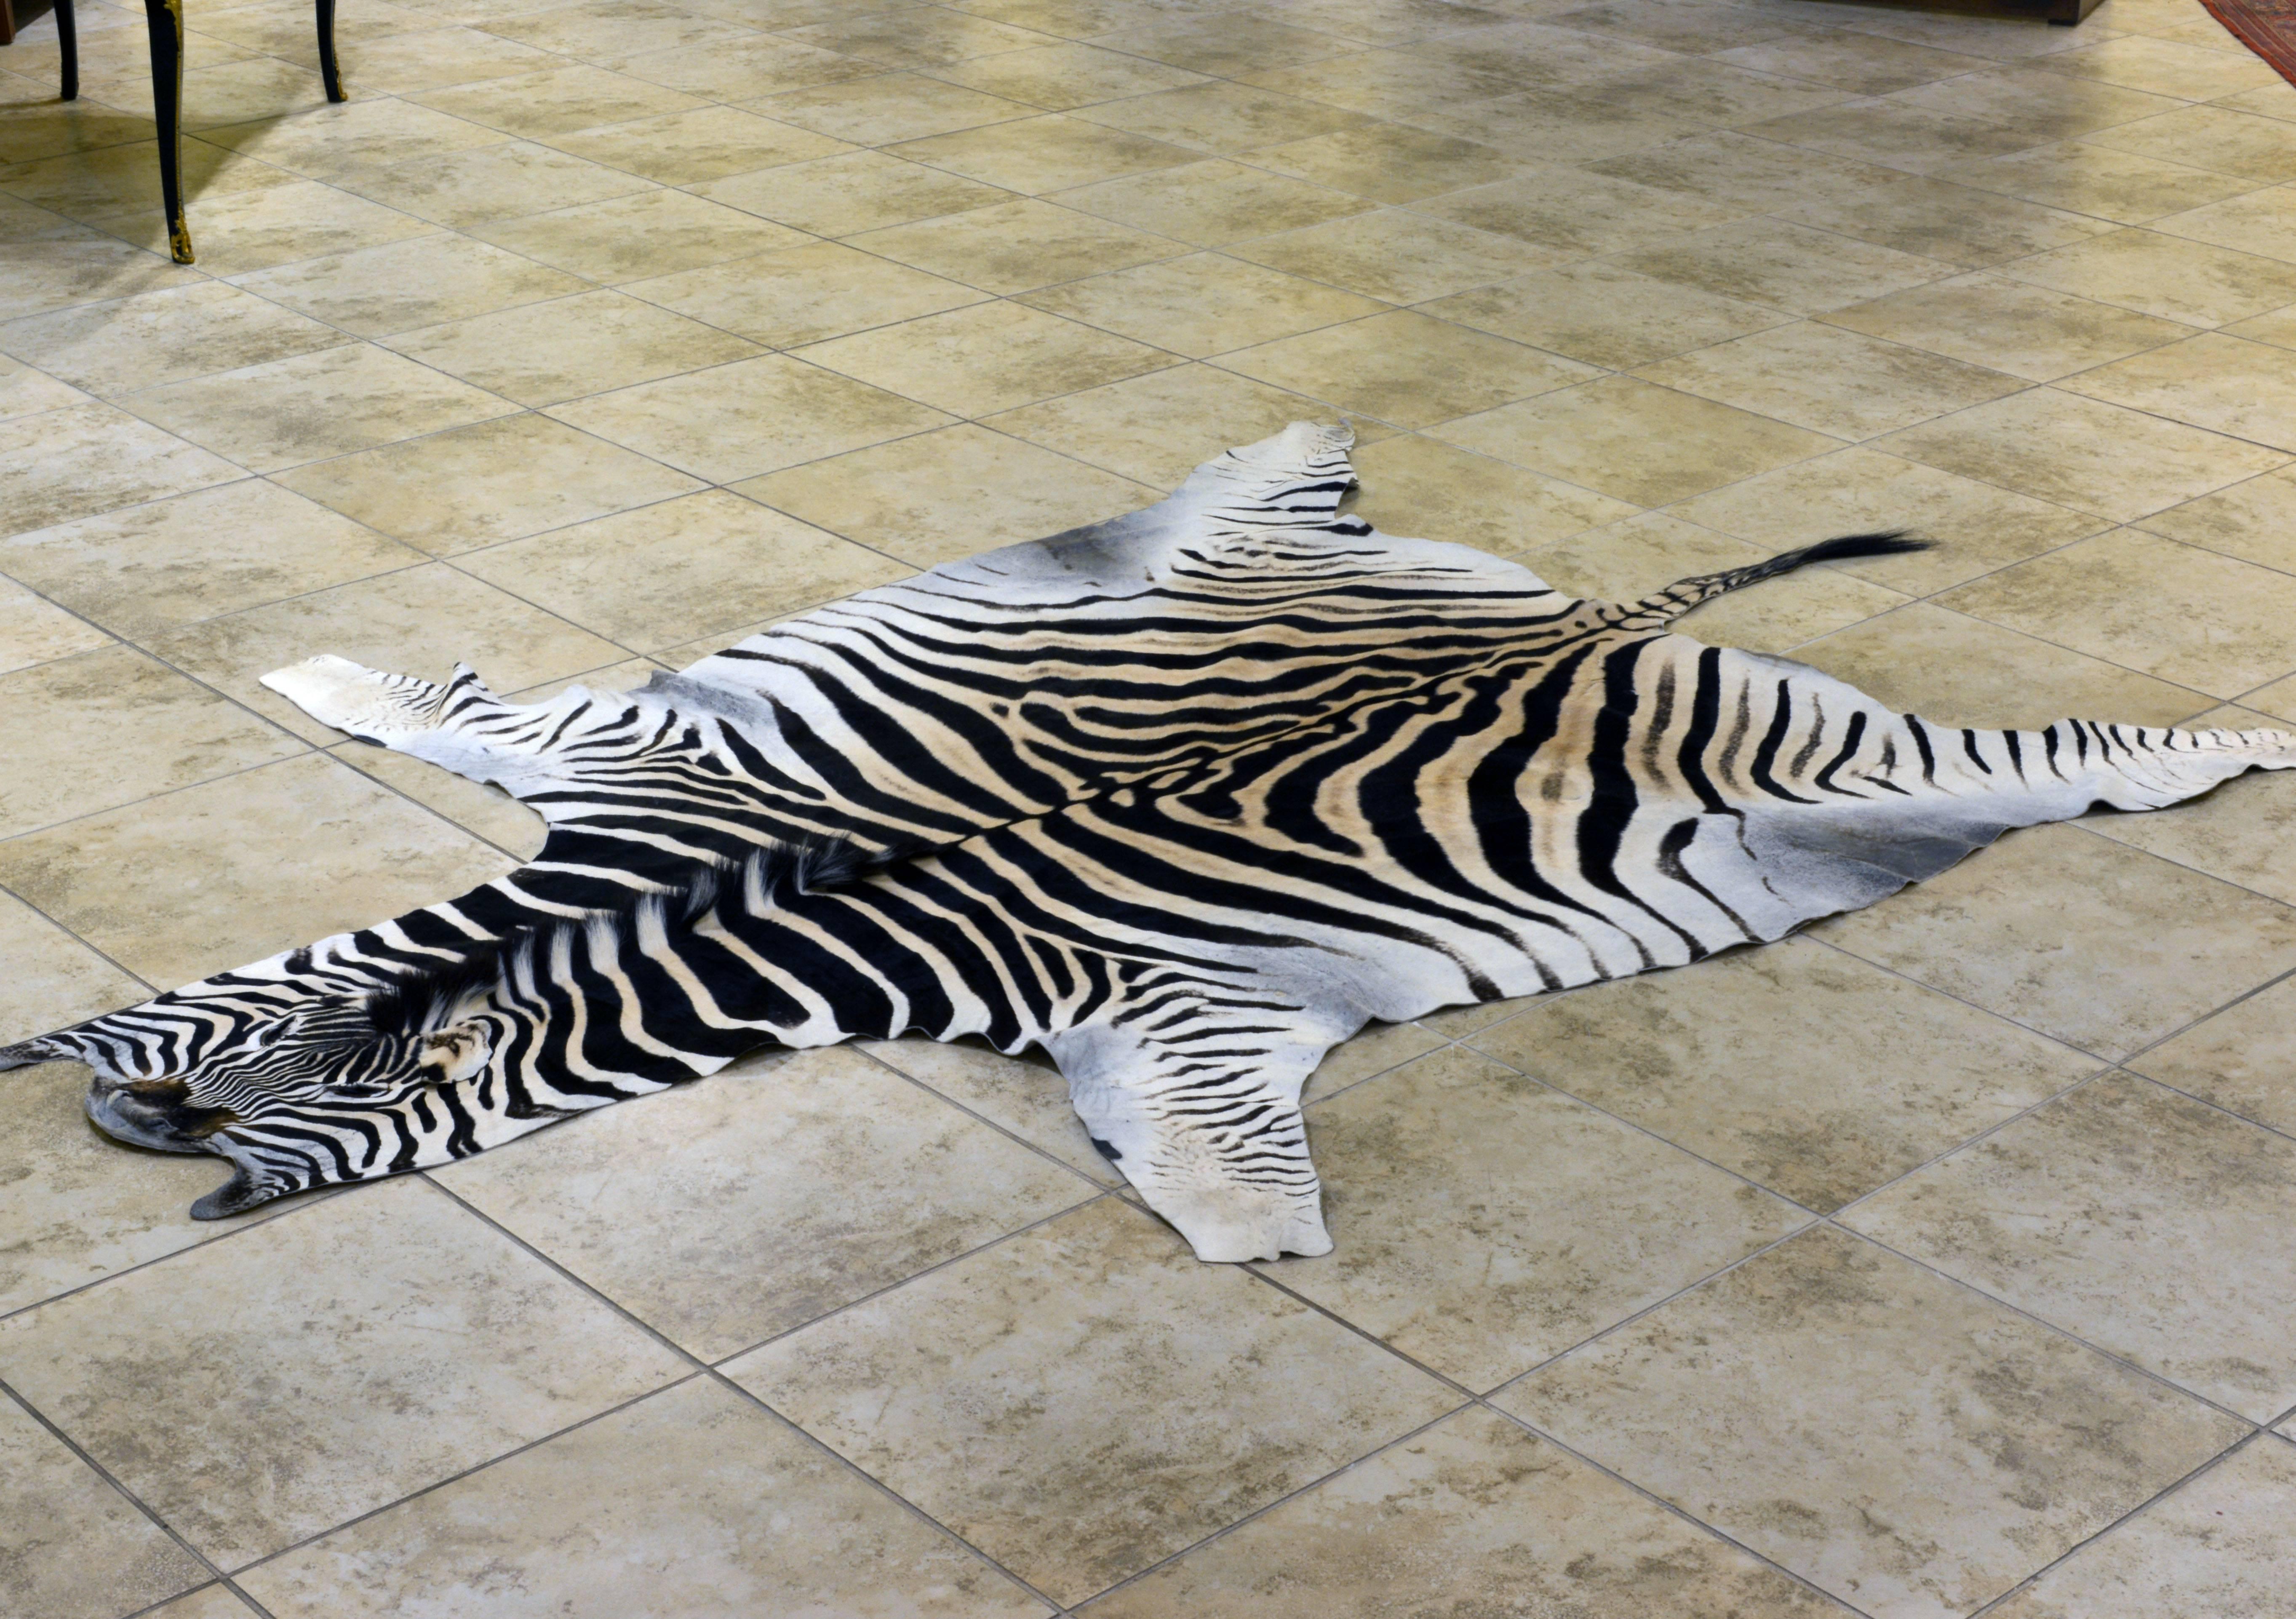 Measuring 105 inches including the tail this zebra hide features desirable colors with great contrast and includes the full head and tail. It is very soft to the touch both front and back and lies on the floor without stubborn creases or fold marks.